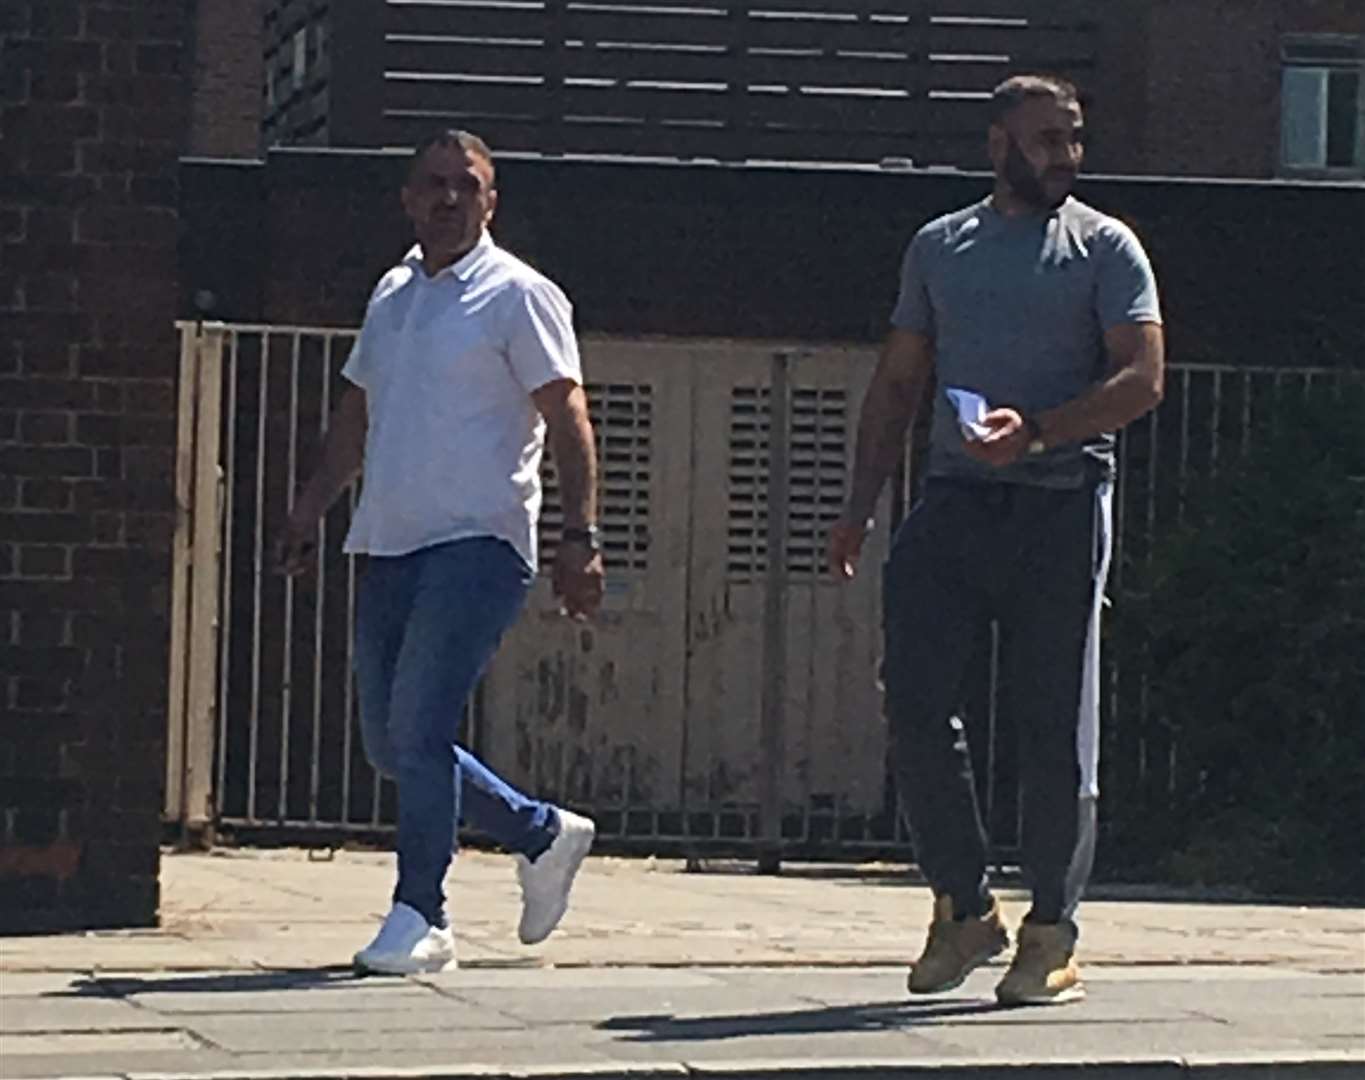 Salam Osman and Arsalan Saed leaving the hearing at Canterbury Magistrates' Court after facing charges of conspiring to sell illegal tobacco (14182346)